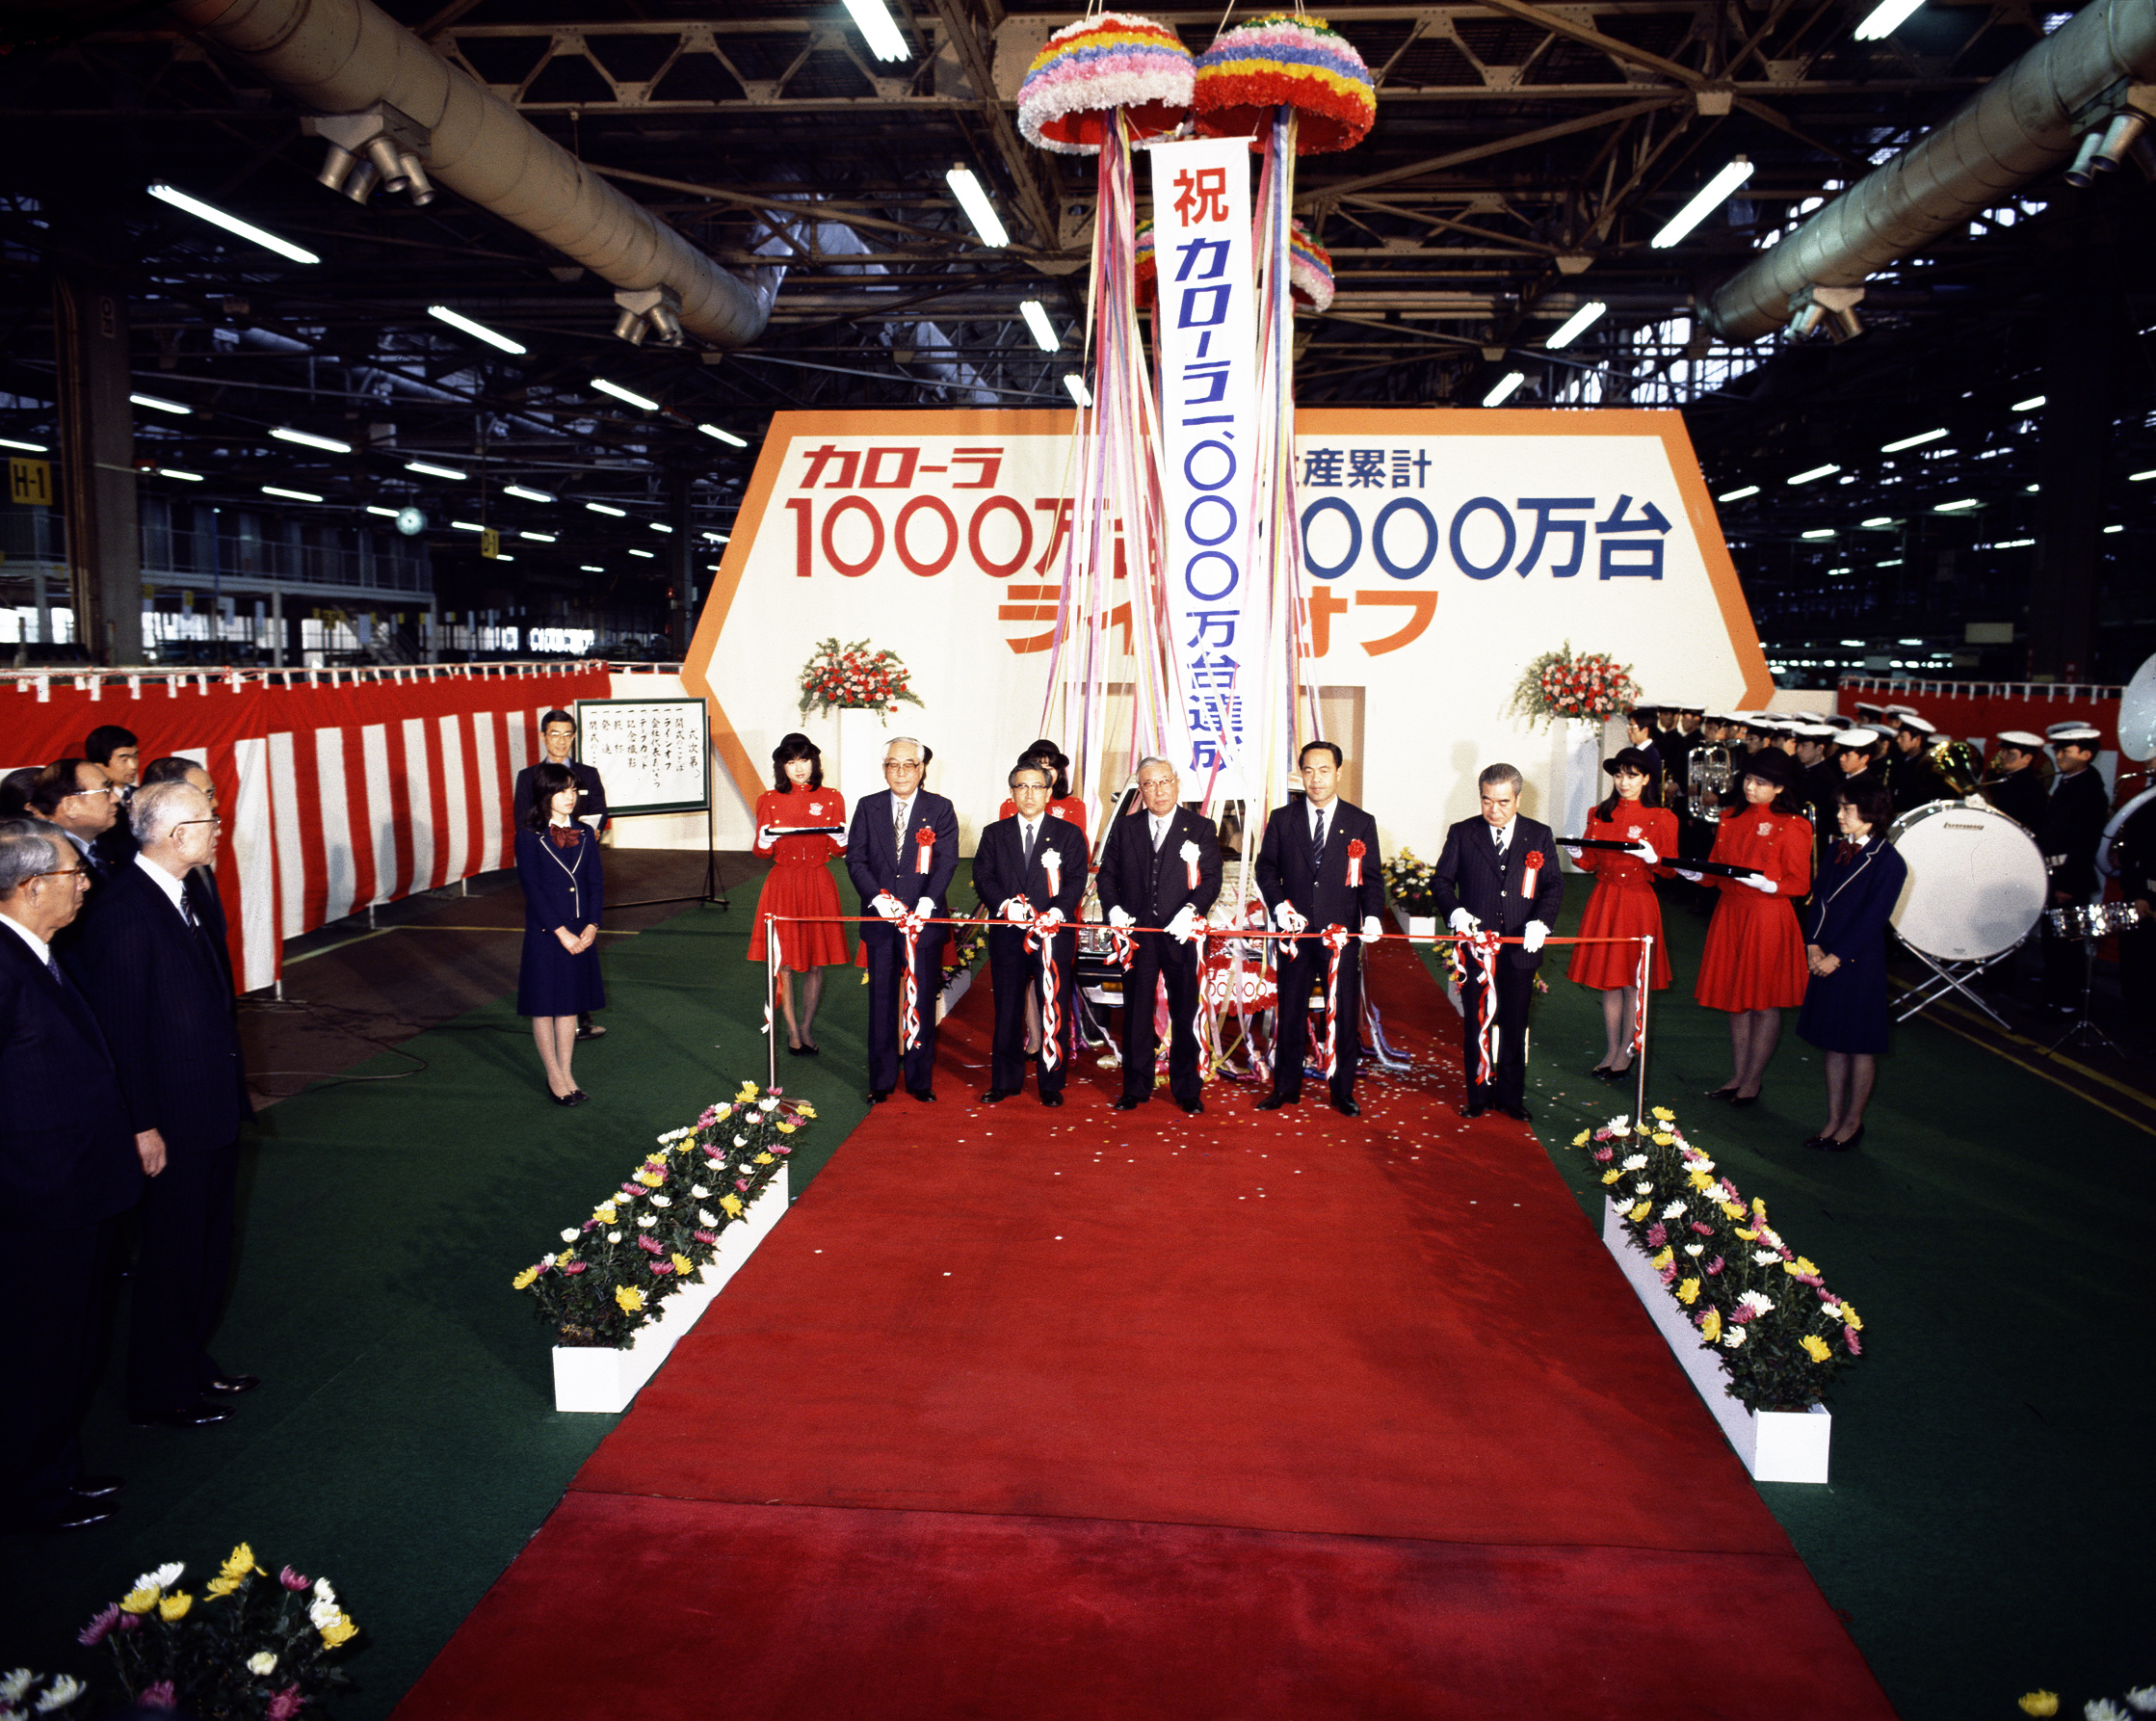 Celebration of the 10 million Corolla productions in 1983